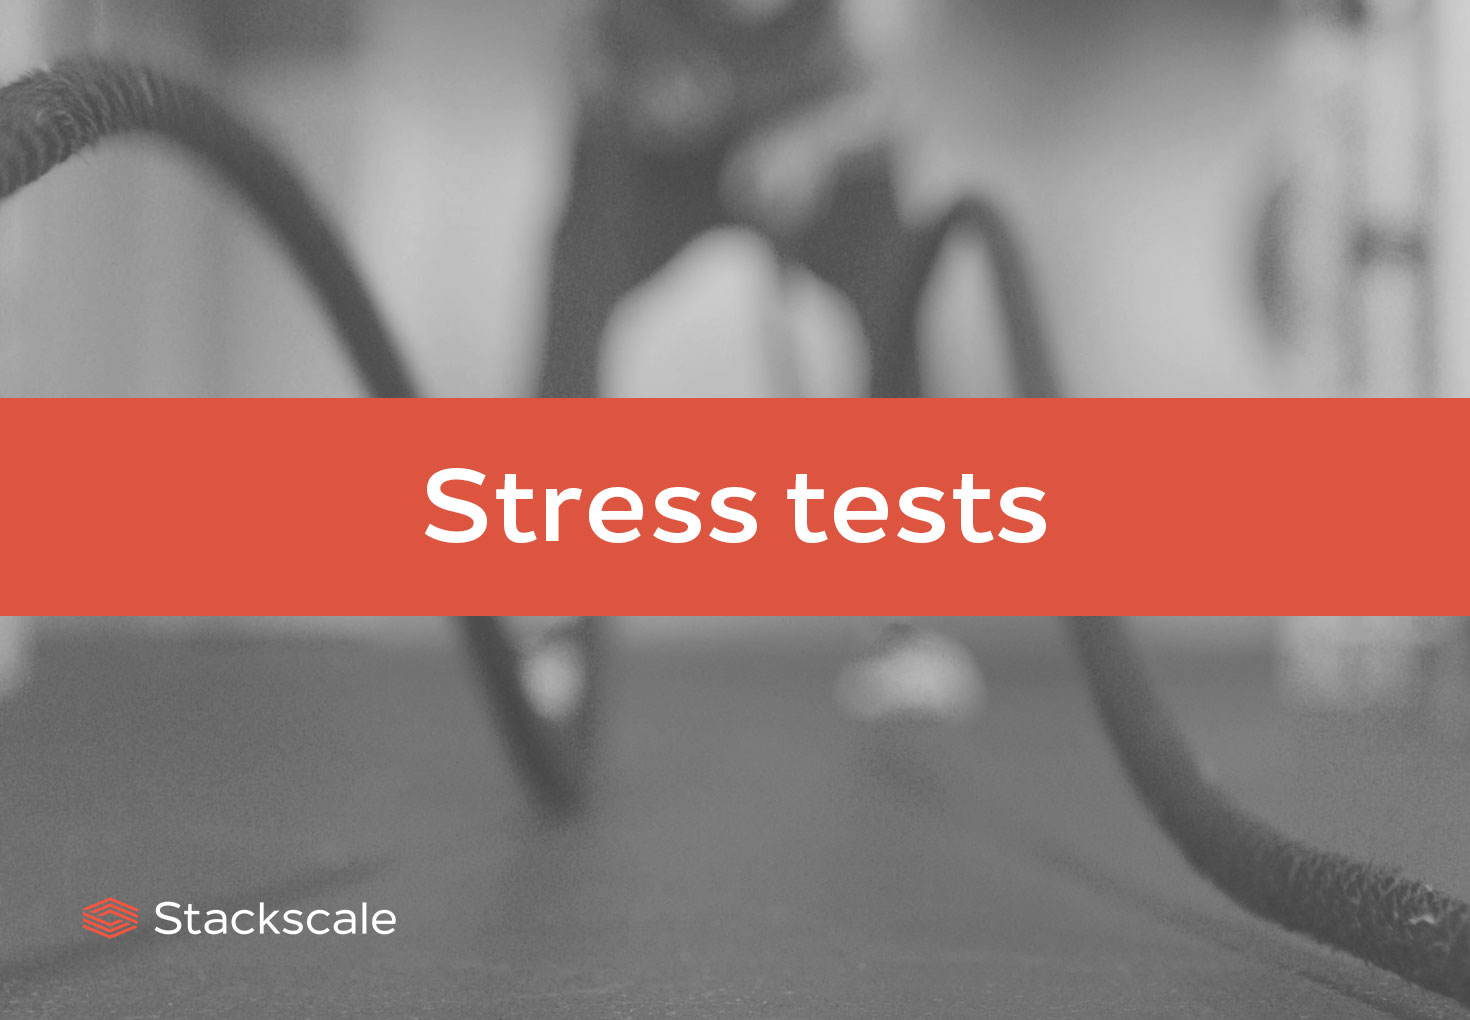 Hardware and software stress testing | Stackscale